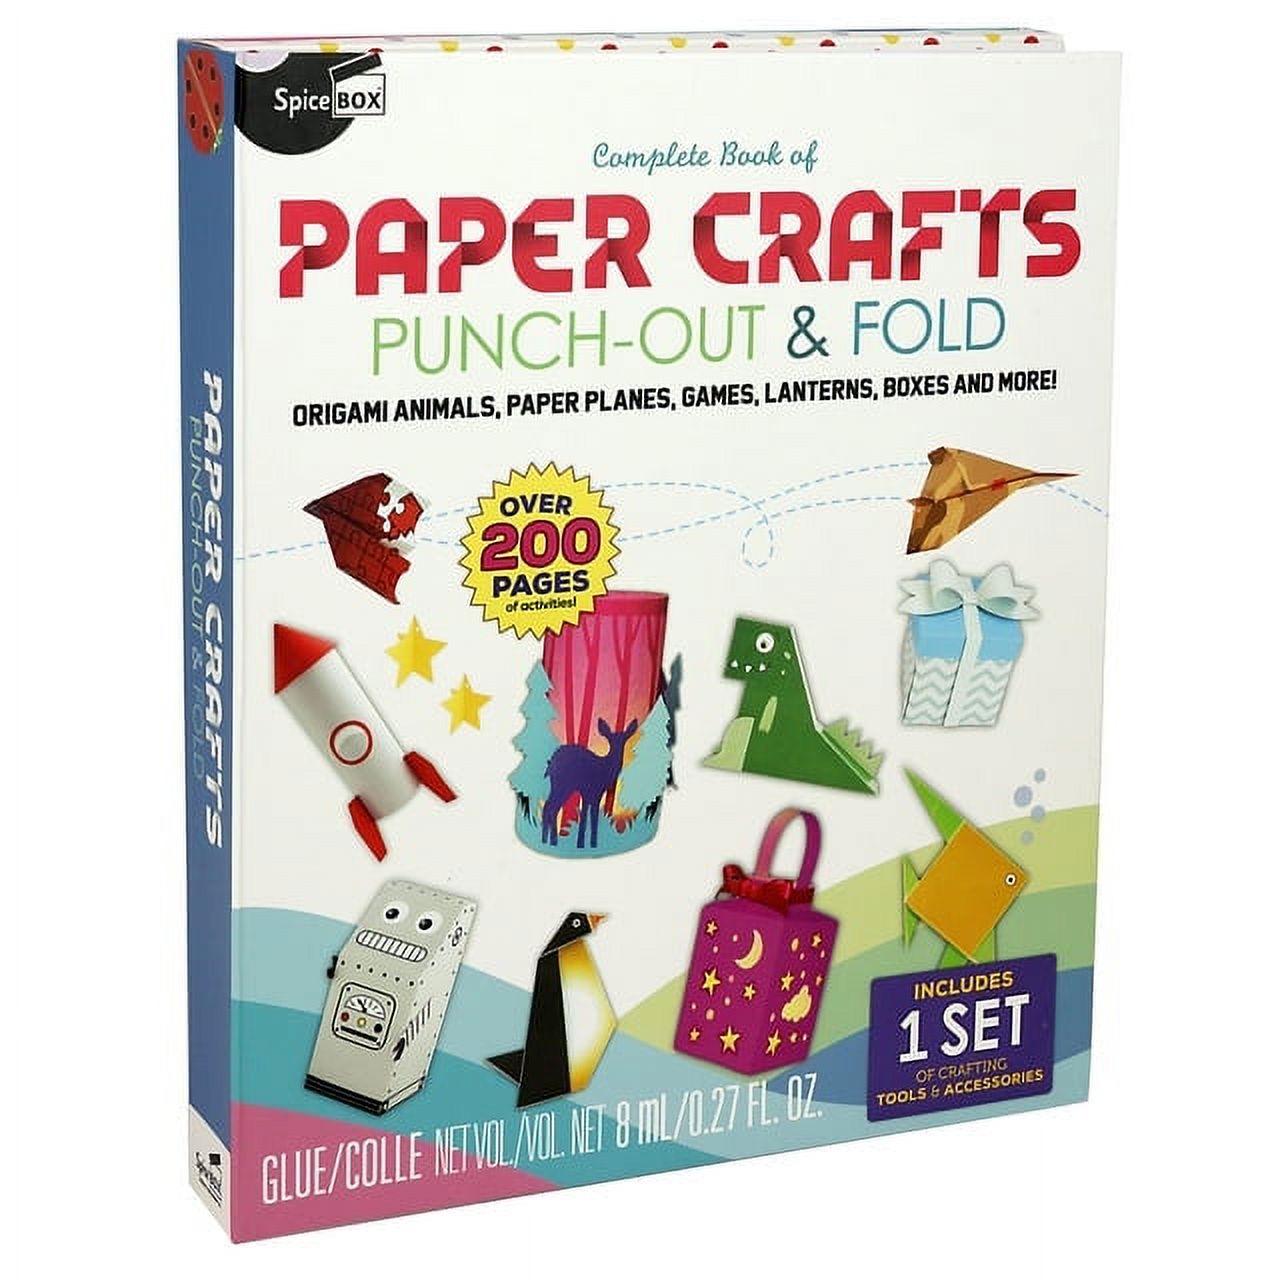 Spicebox Adult Art Craft & Hobby Kits Complete Book of Paper Crafts